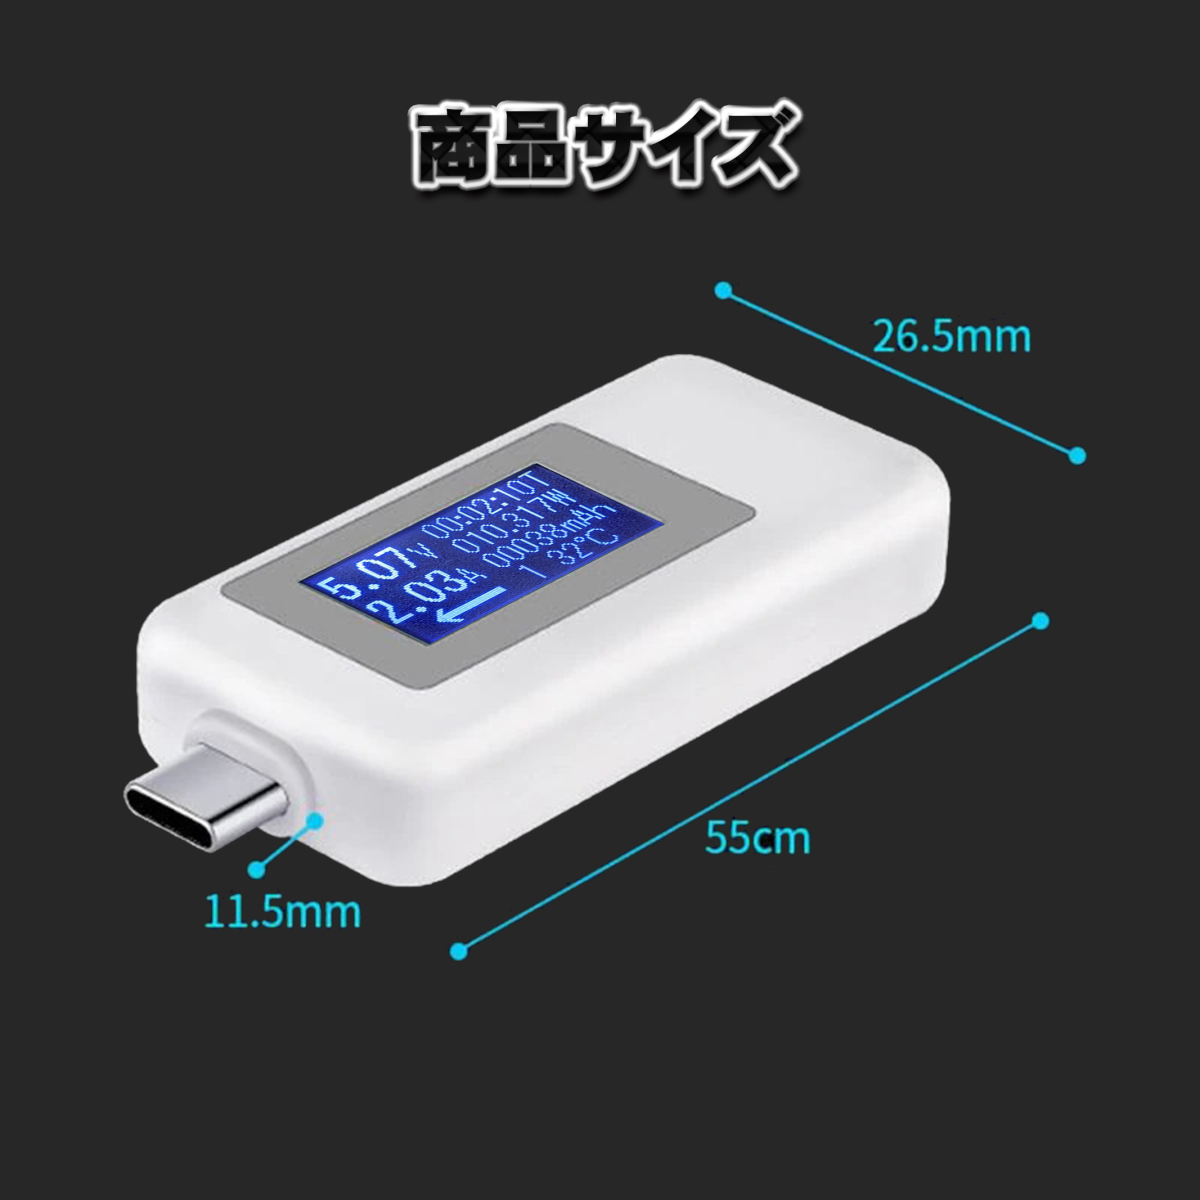 Type-c tester 0-5.1A USB electric current voltage tester checker screen rotation multifunction display 4-30V DC display charger inspection . vessel KWS-1802C[ white ]